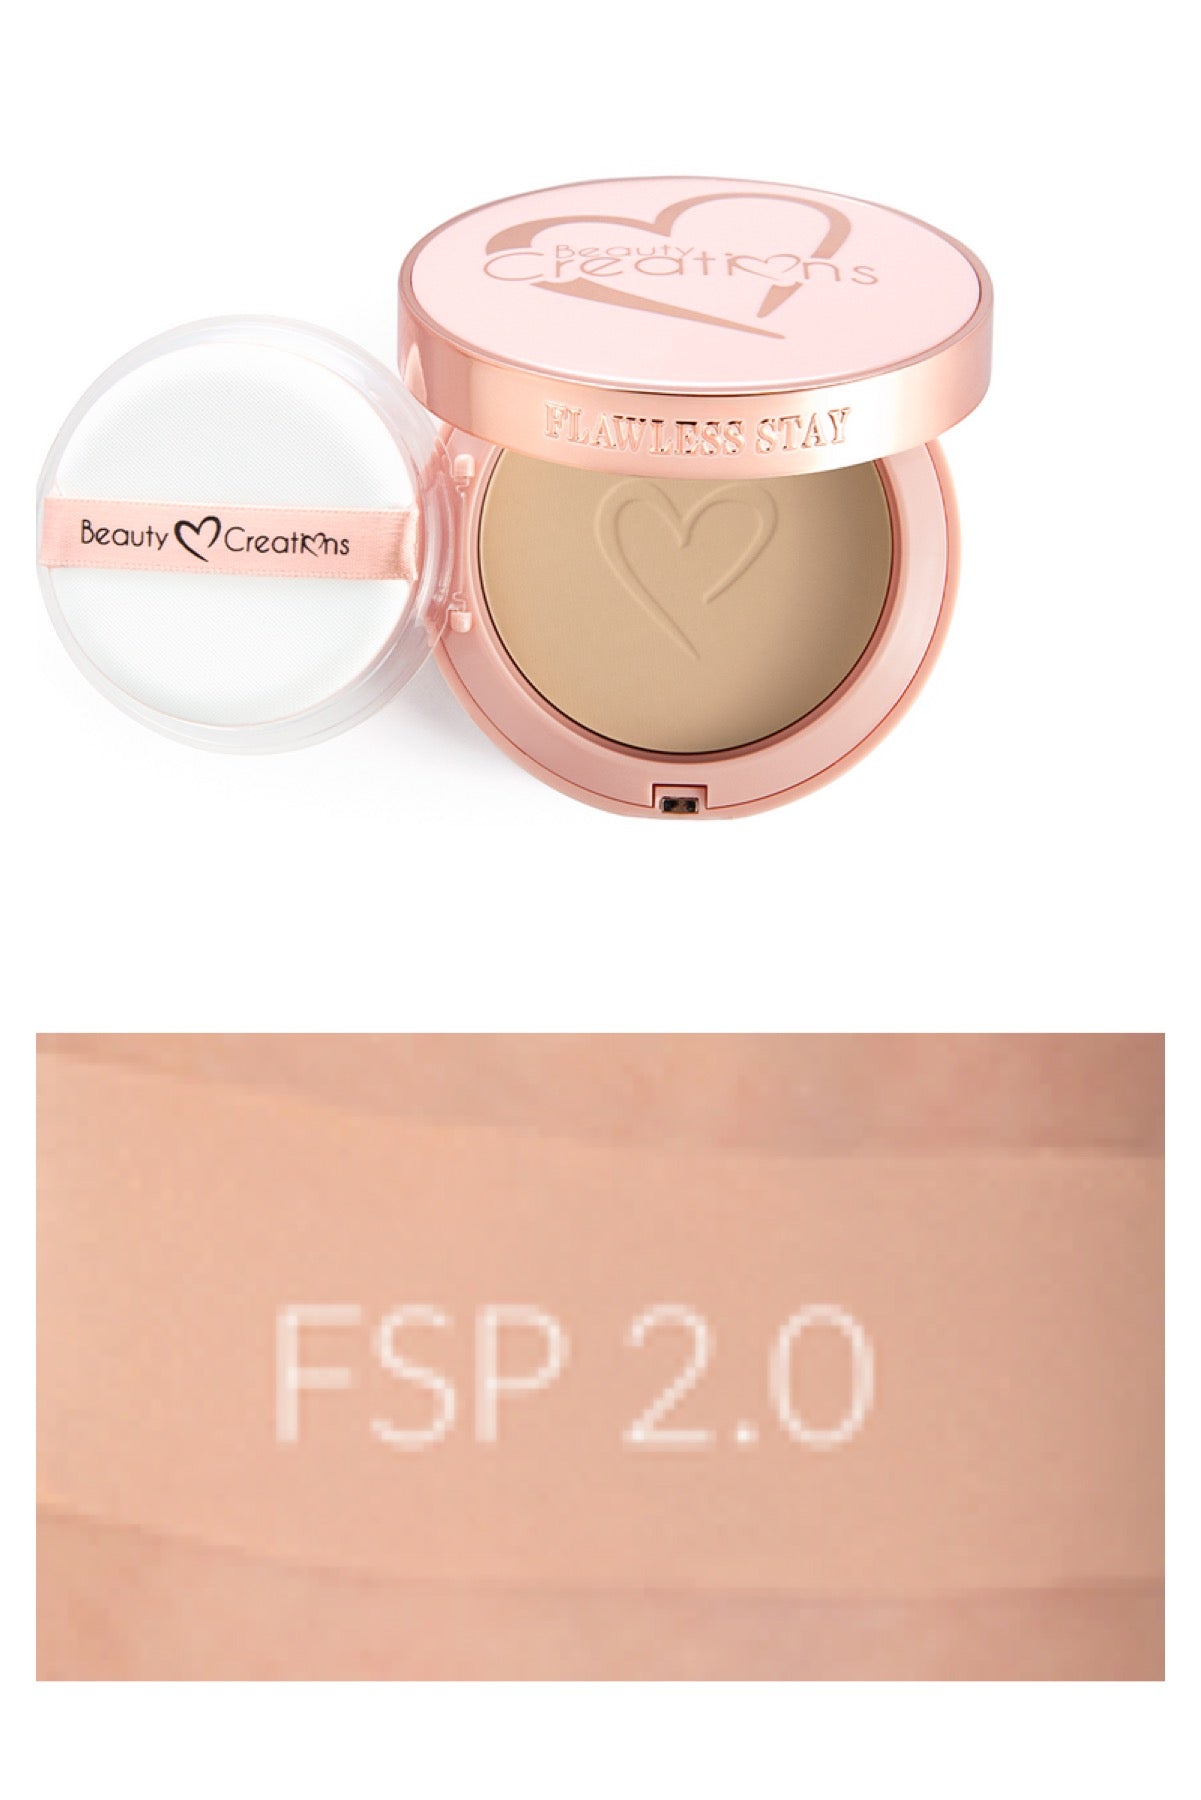 Flawless Stay Powder Foundations Vibe Clothing Company 2.0 